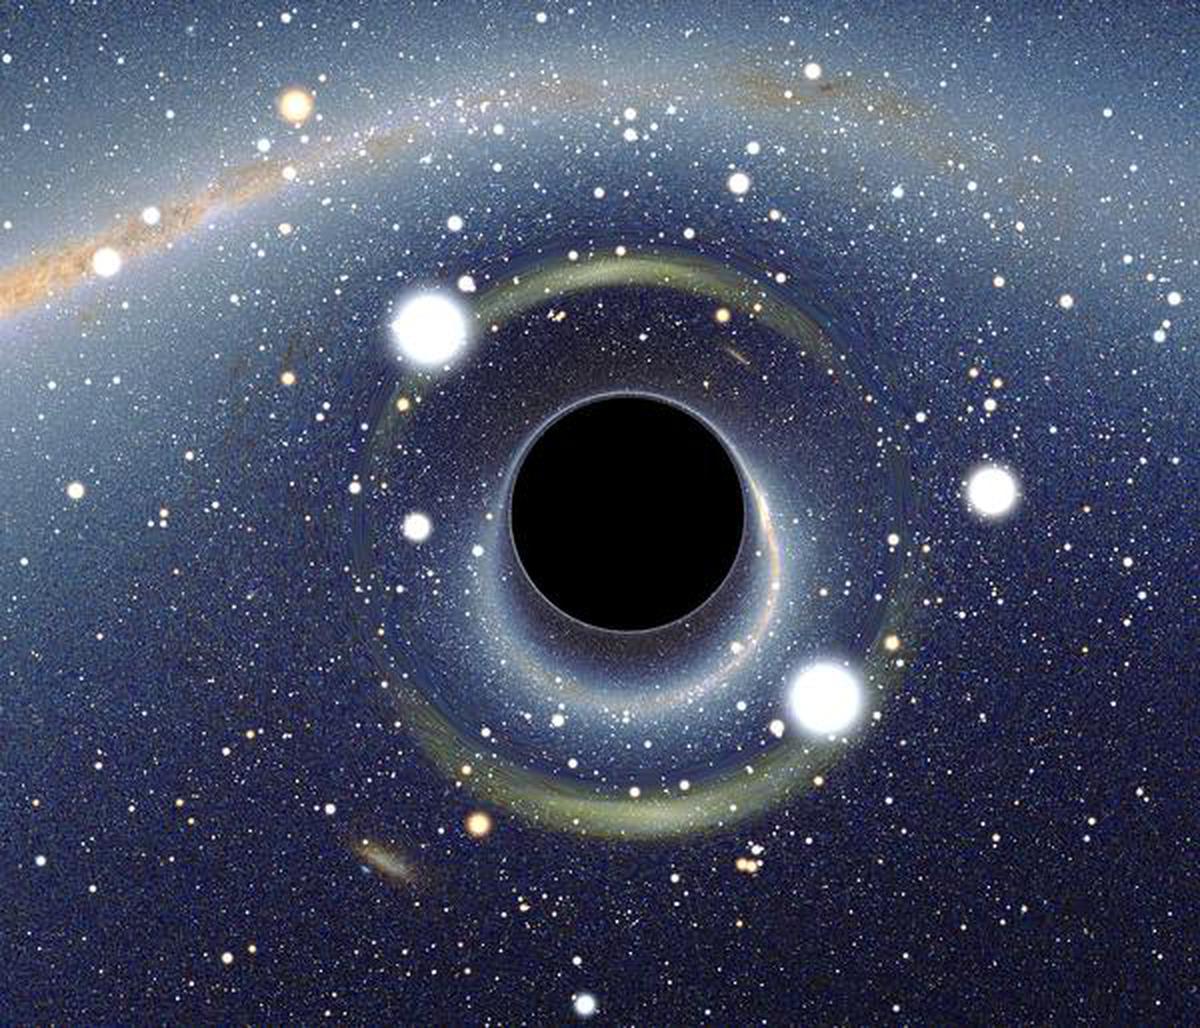 URSC and IITG scientists detect radiation from extra-galactic black hole